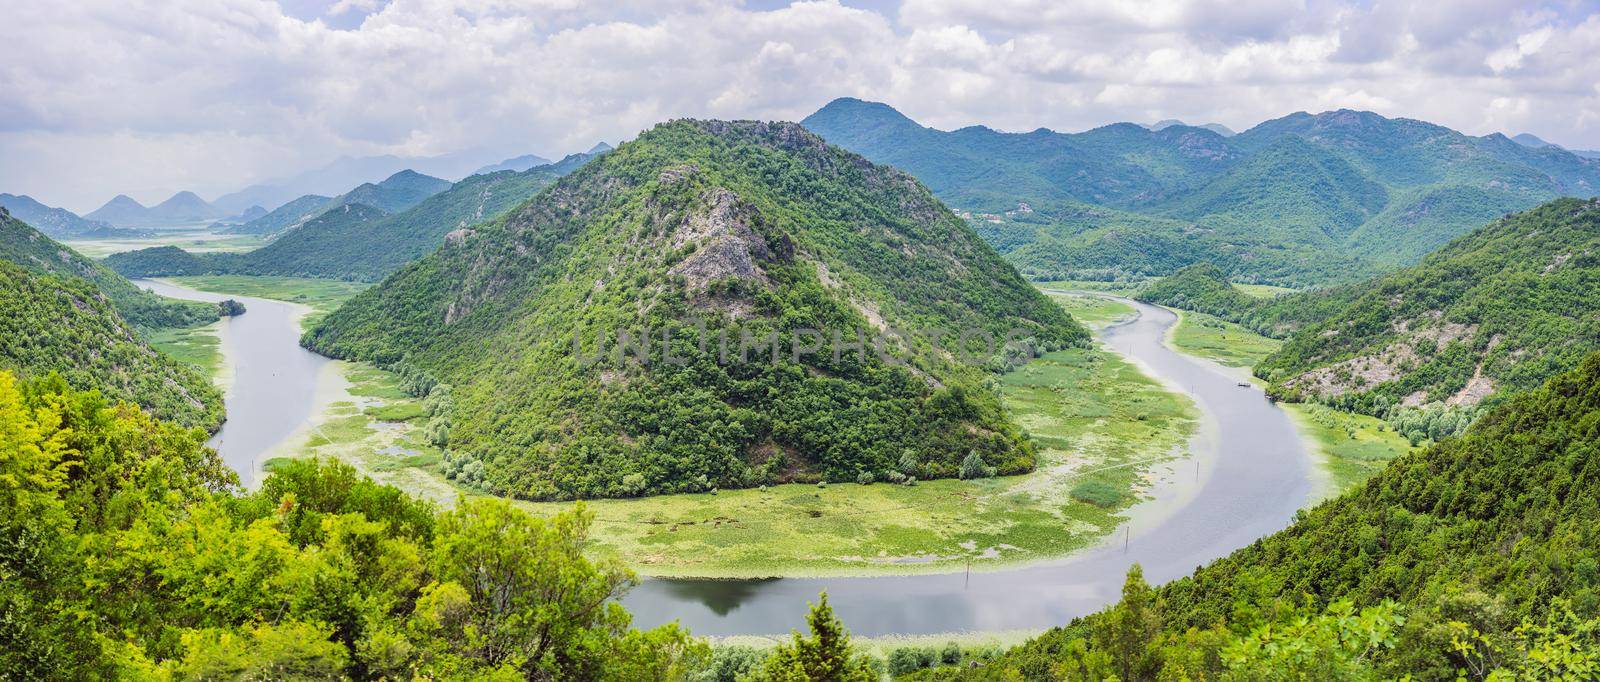 Canyon of Rijeka Crnojevica river near the Skadar lake coast. One of the most famous views of Montenegro. River makes a turn between the mountains and flows backward.